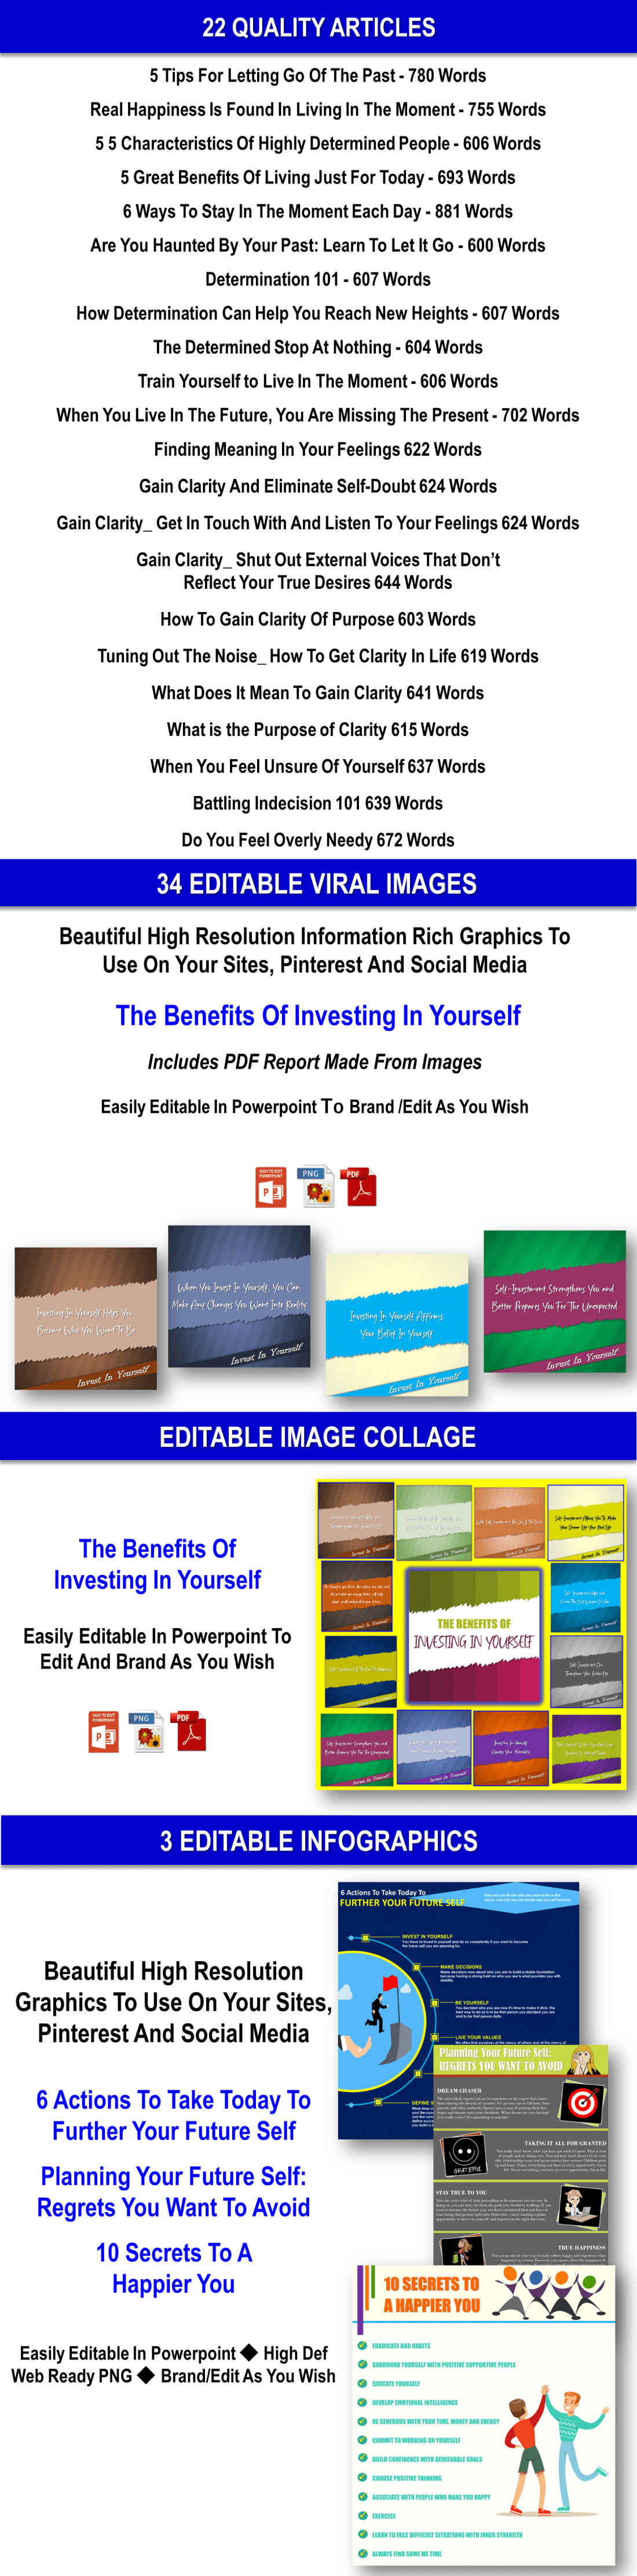 SENSE OF BELONGING Content Pack with PLR Rights